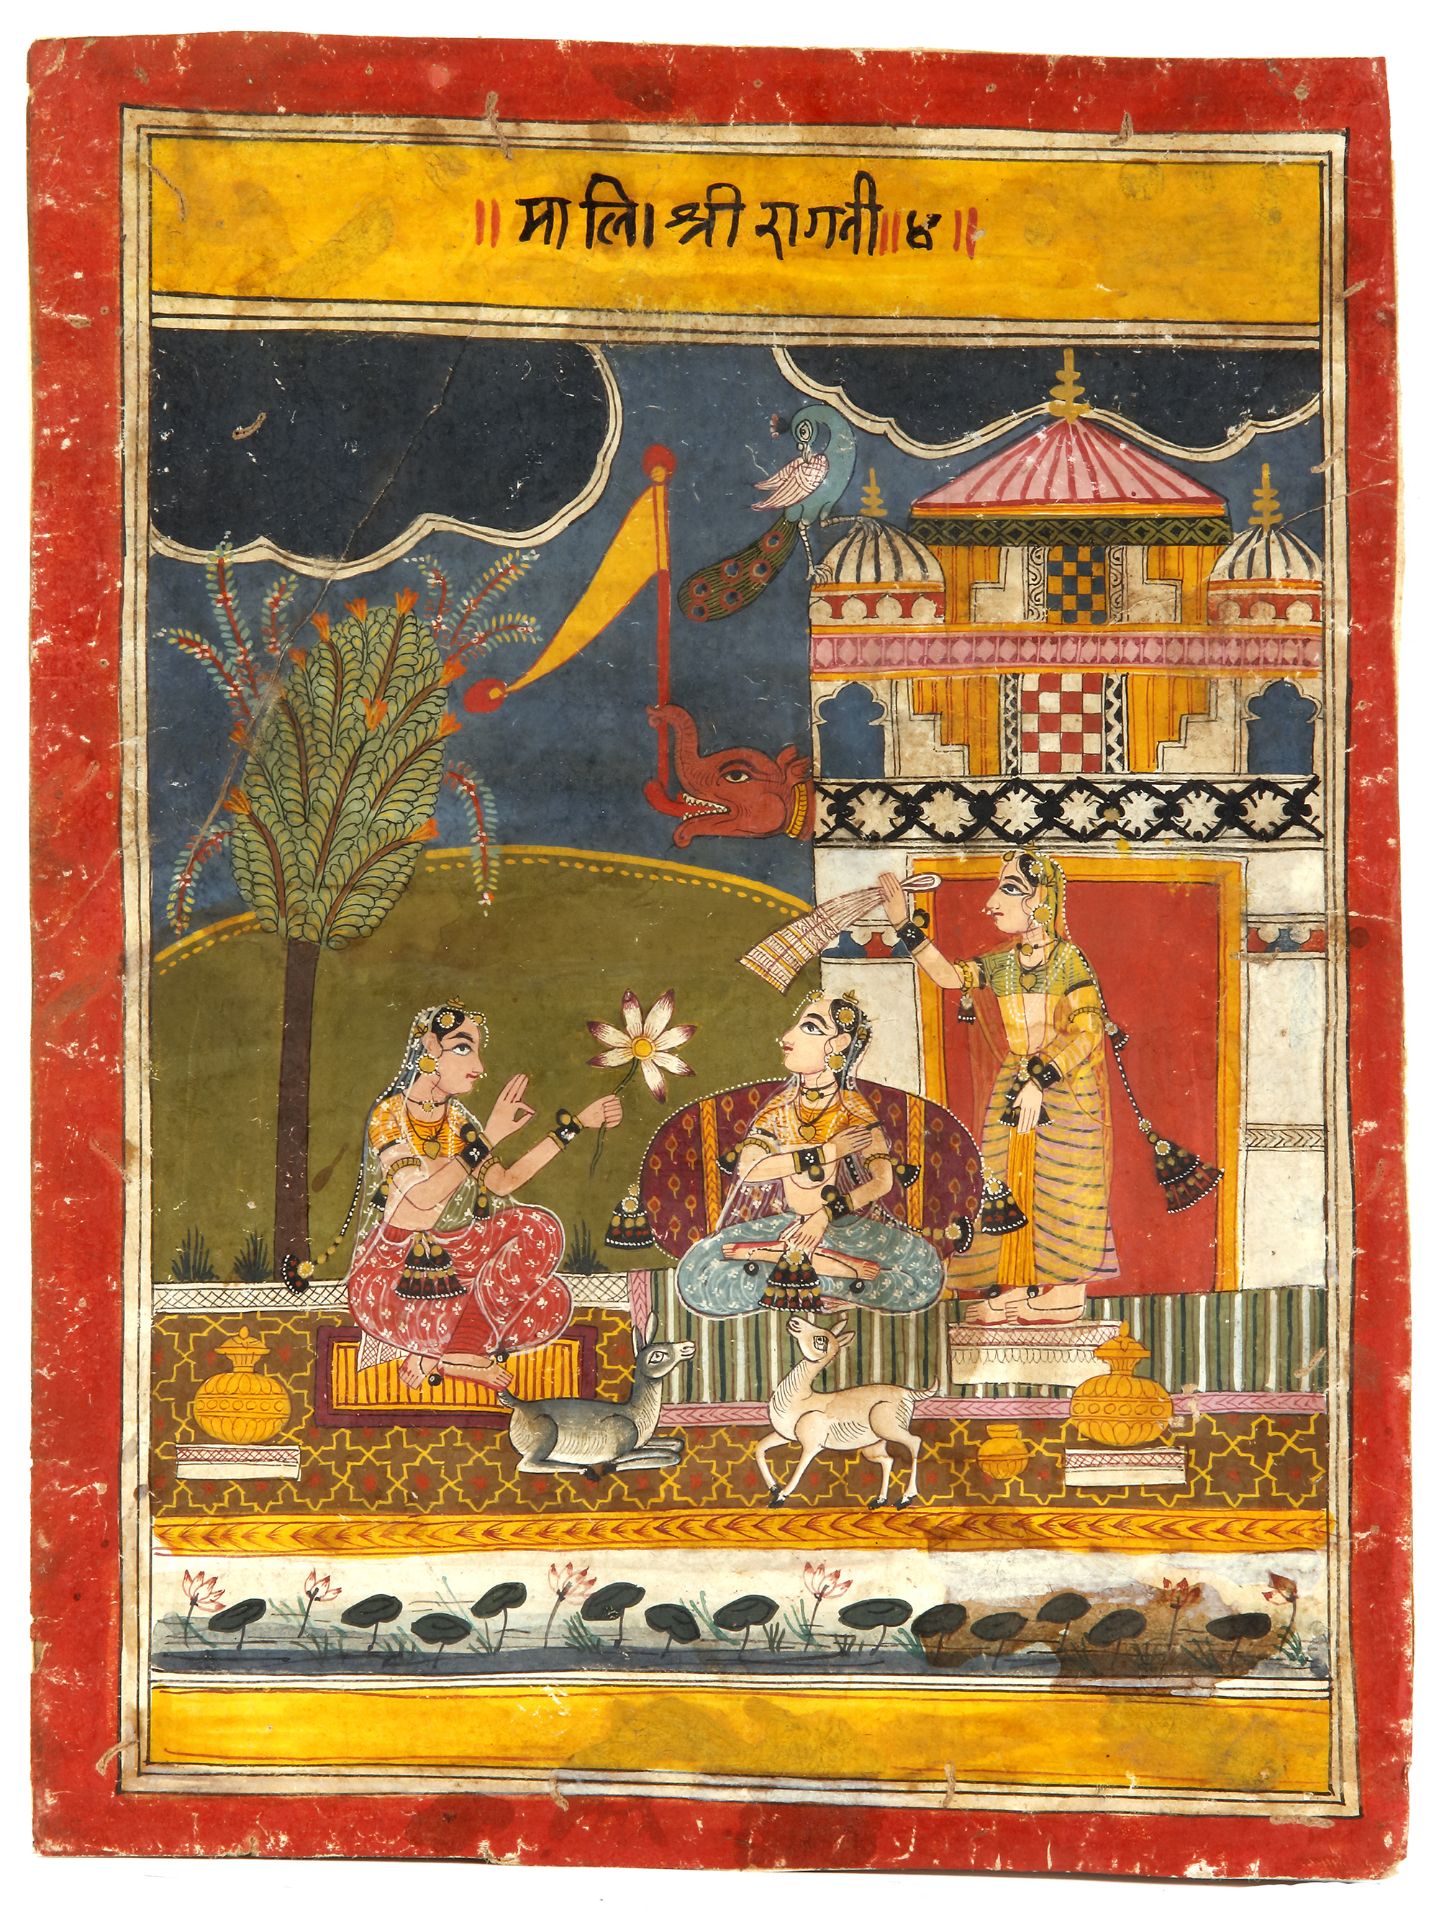 THREE IIIUSTRATIONS FROM A RAGAMALA SERIES, CENTRAL INDIA, MALWA, 17TH CENTURY - Image 3 of 5